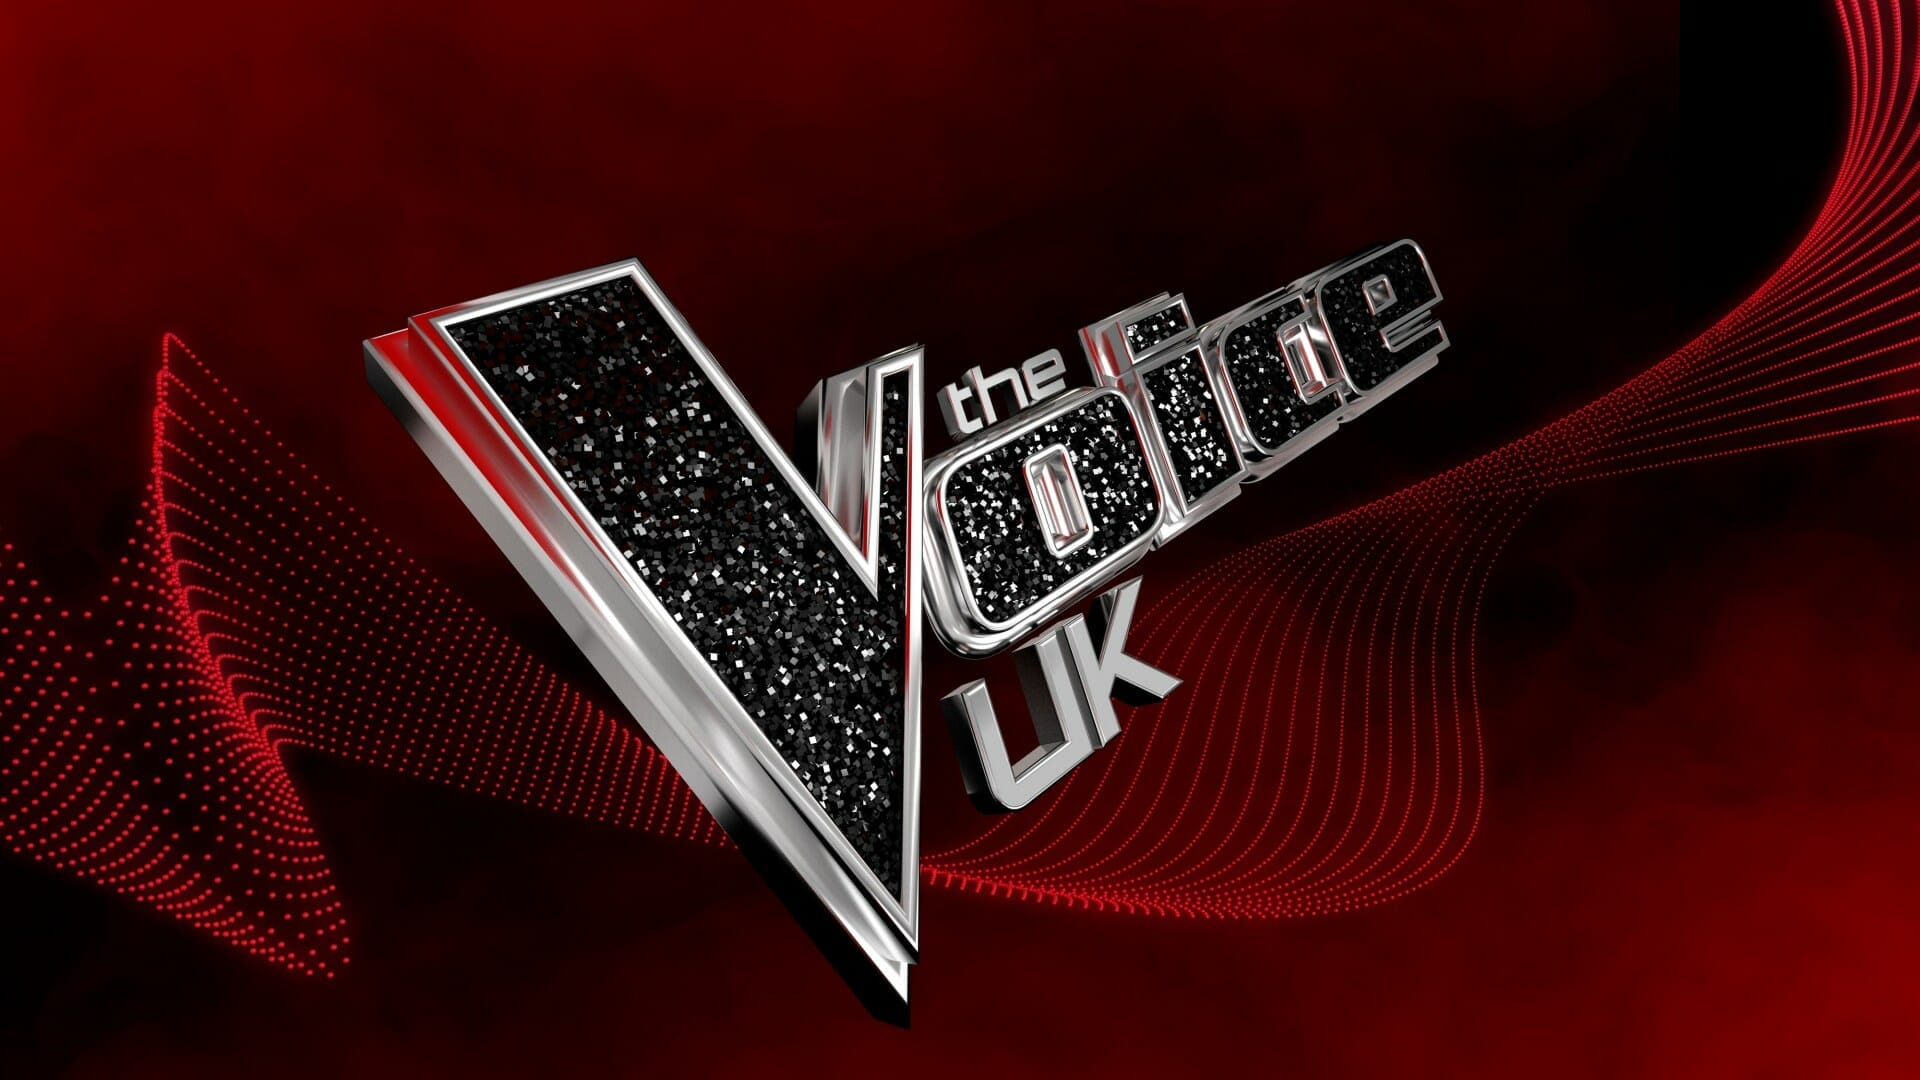 Huge star says he's 'gutted' to be axed from The Voice UK after years on the panel in shock show shake-up